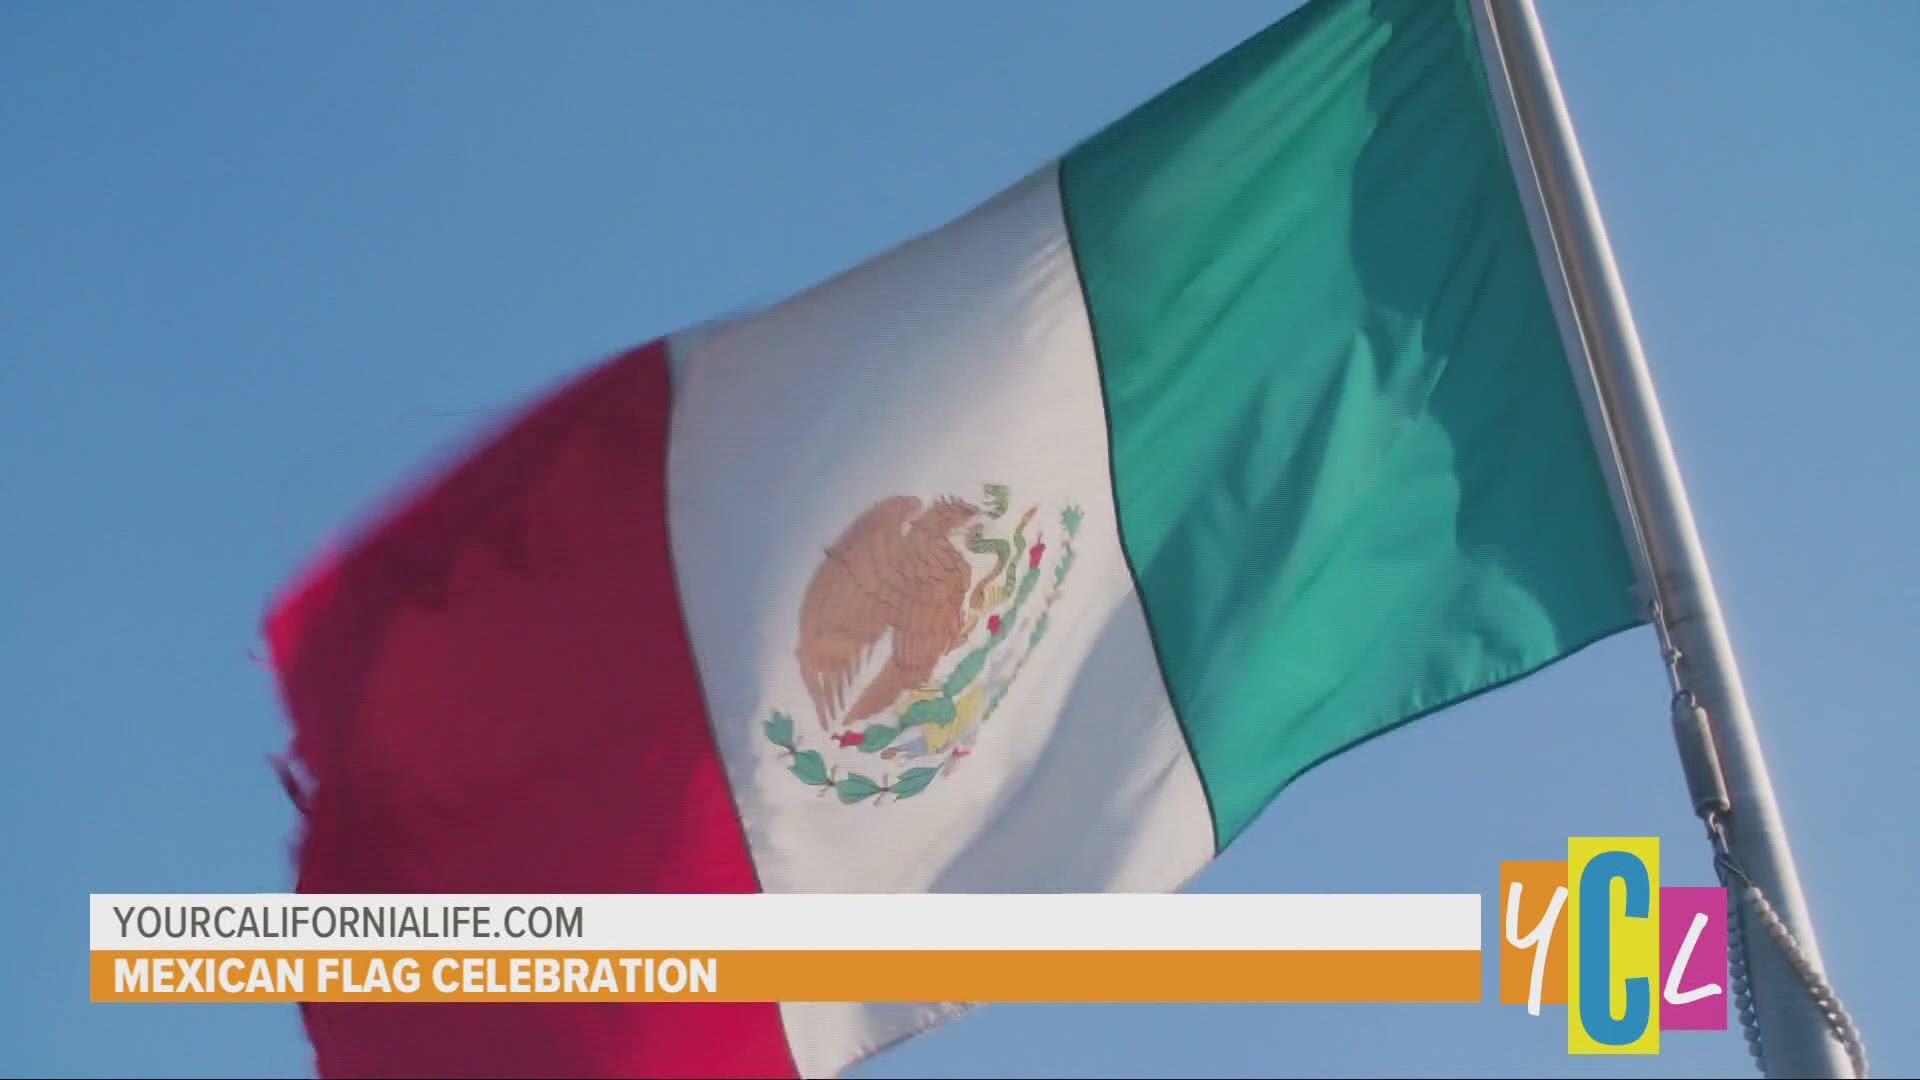 Celebrate Mexican Flag Day at Sutter’s Fort!